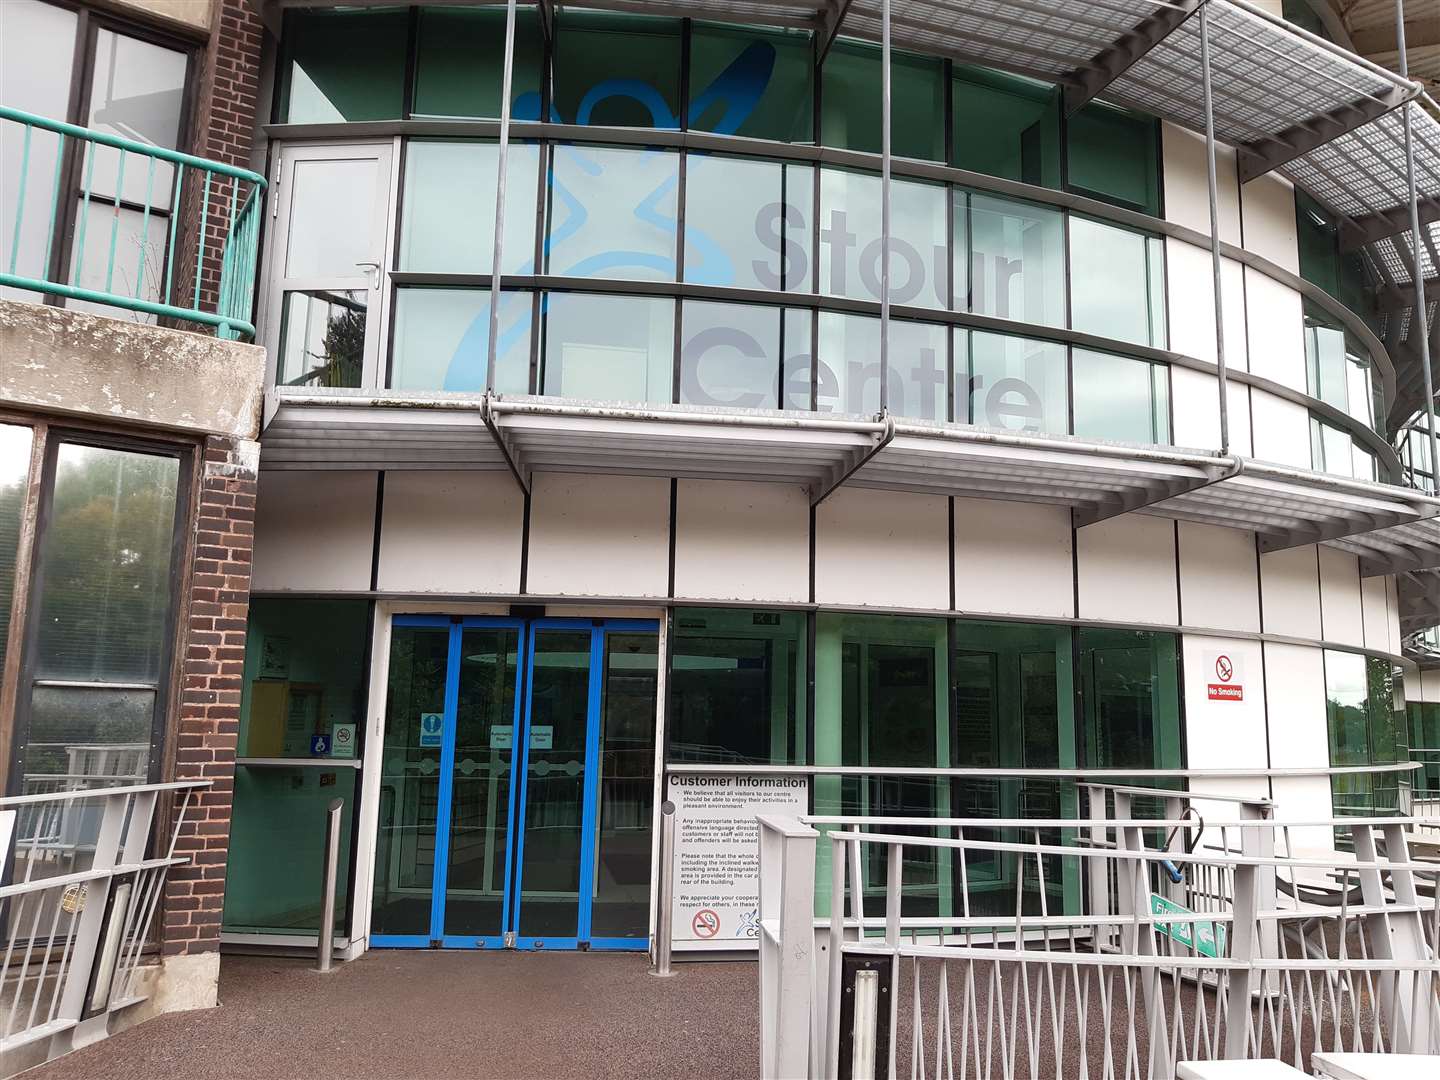 How the Stour Centre entrance currently looks